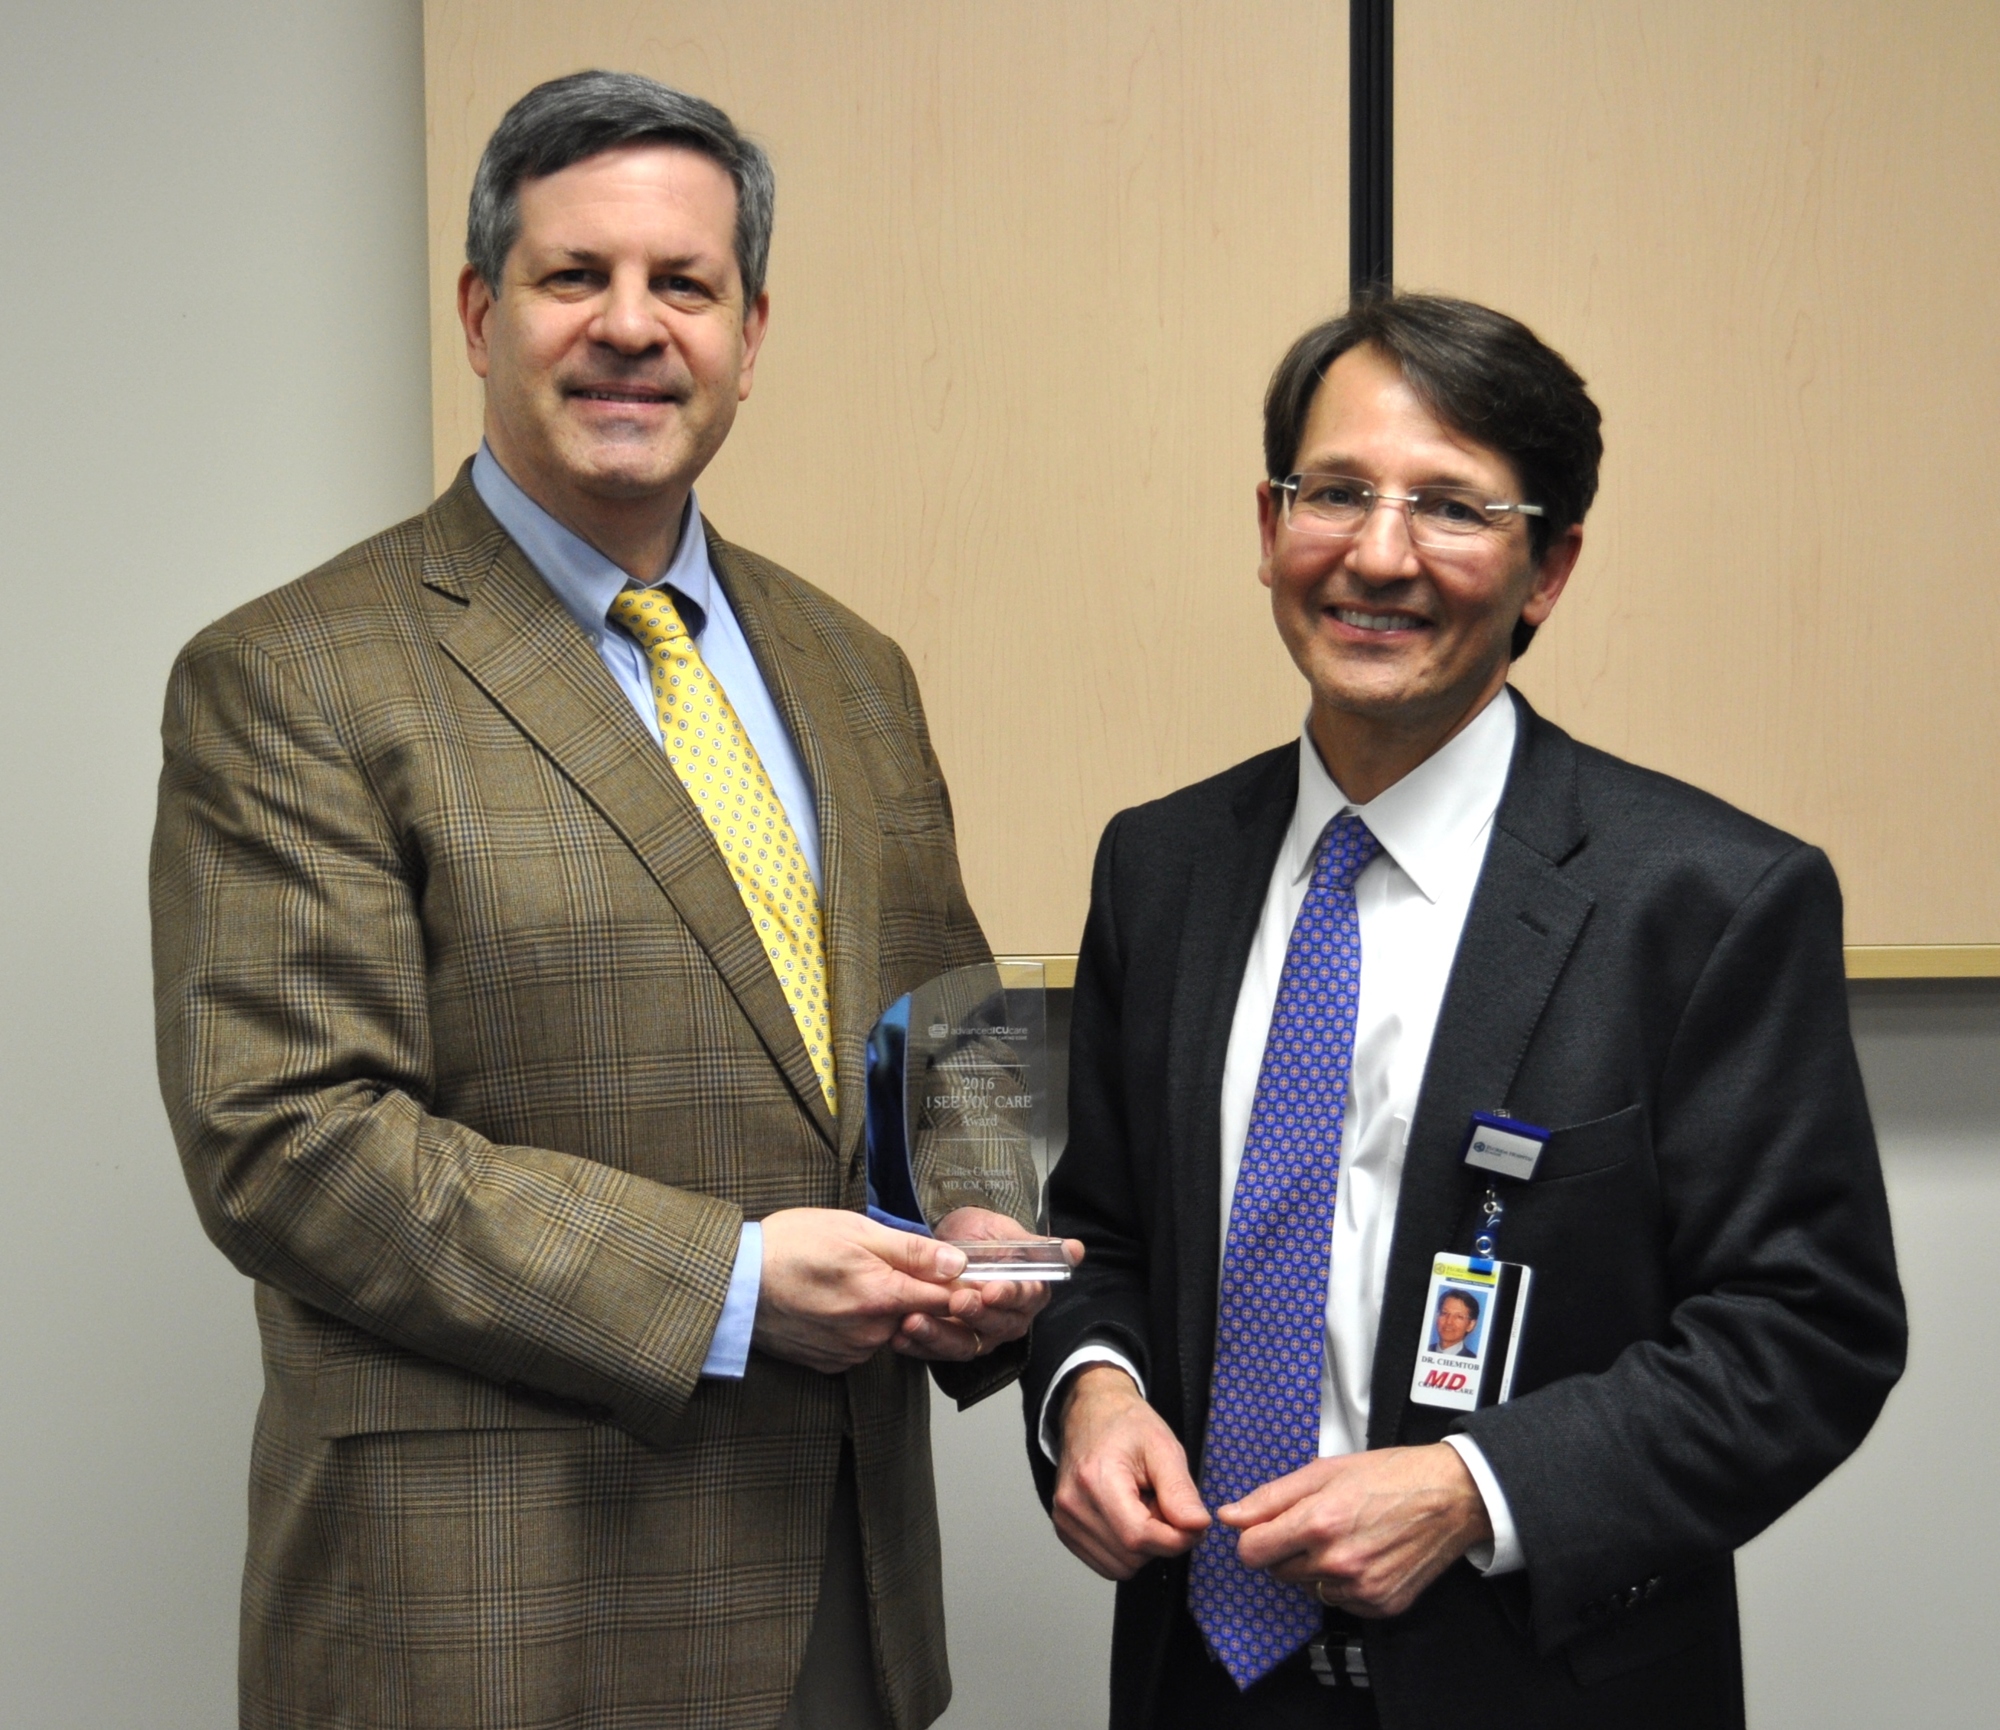 Dr. David Nierman (left) presented Dr. Gilles Chemtob (right) with the 2016 I See You Care Award.